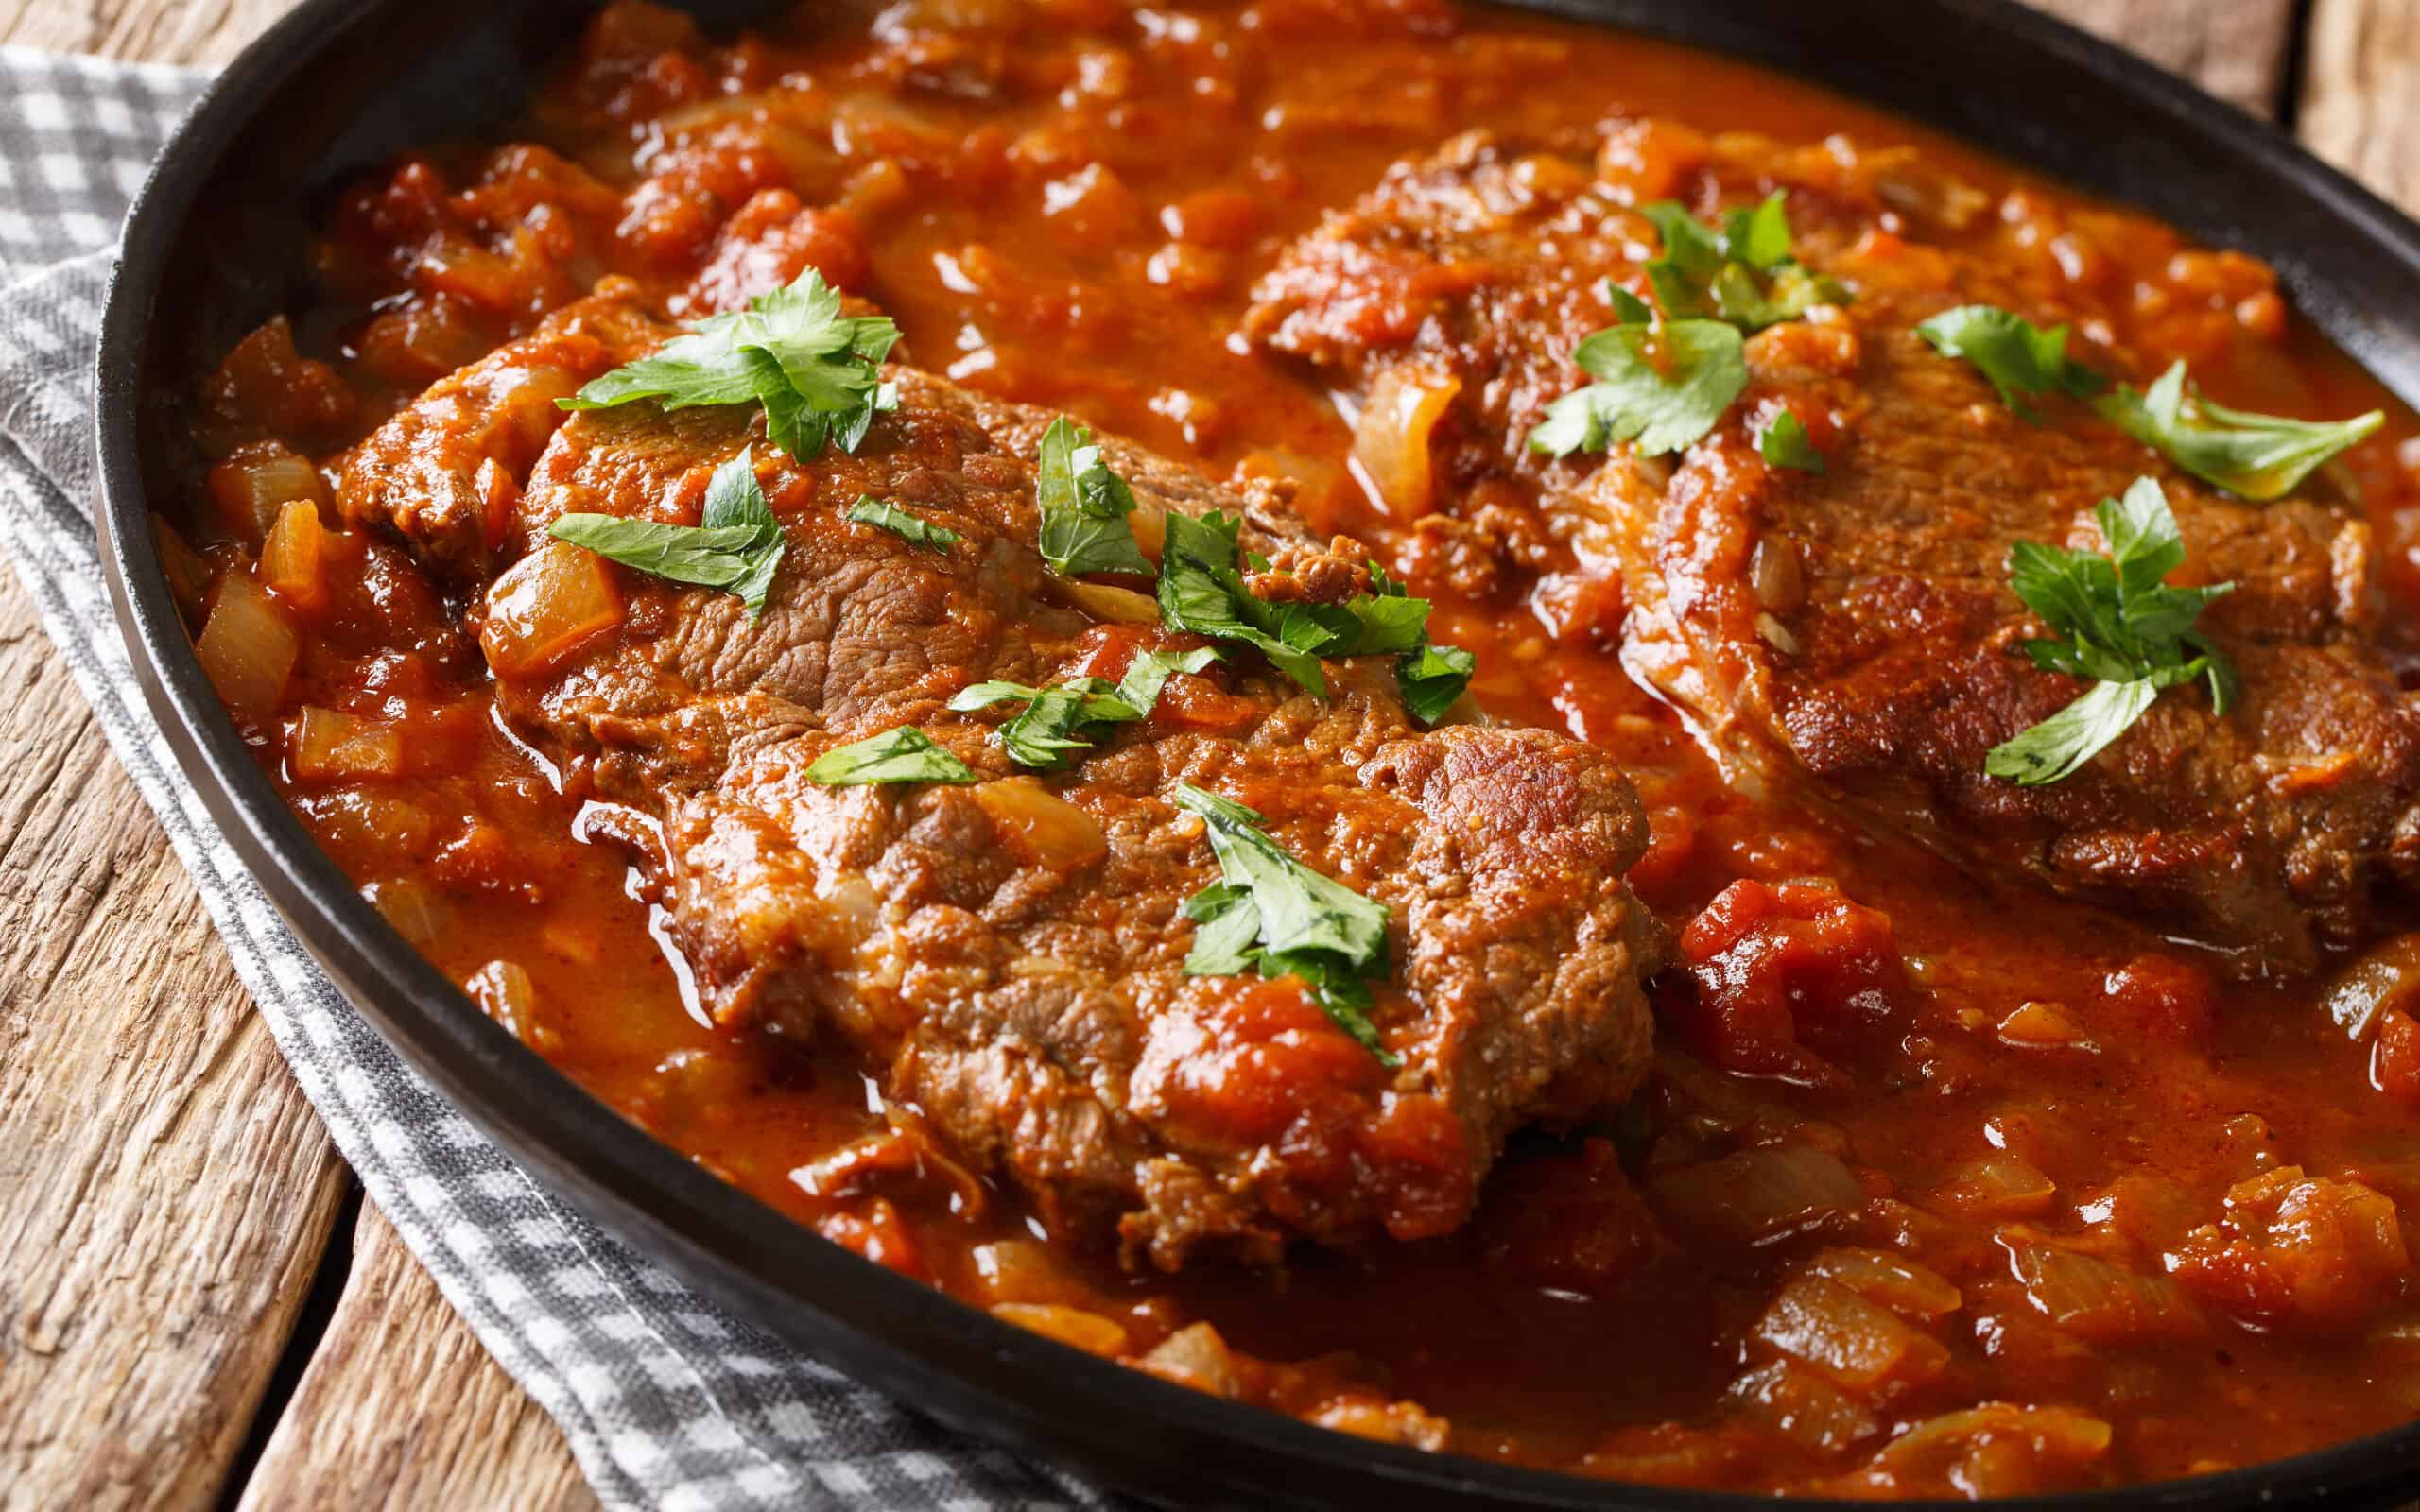 Classic Swiss steak fried and slowly cooked in a fragrant tomato sauce with vegetables close-up on the table